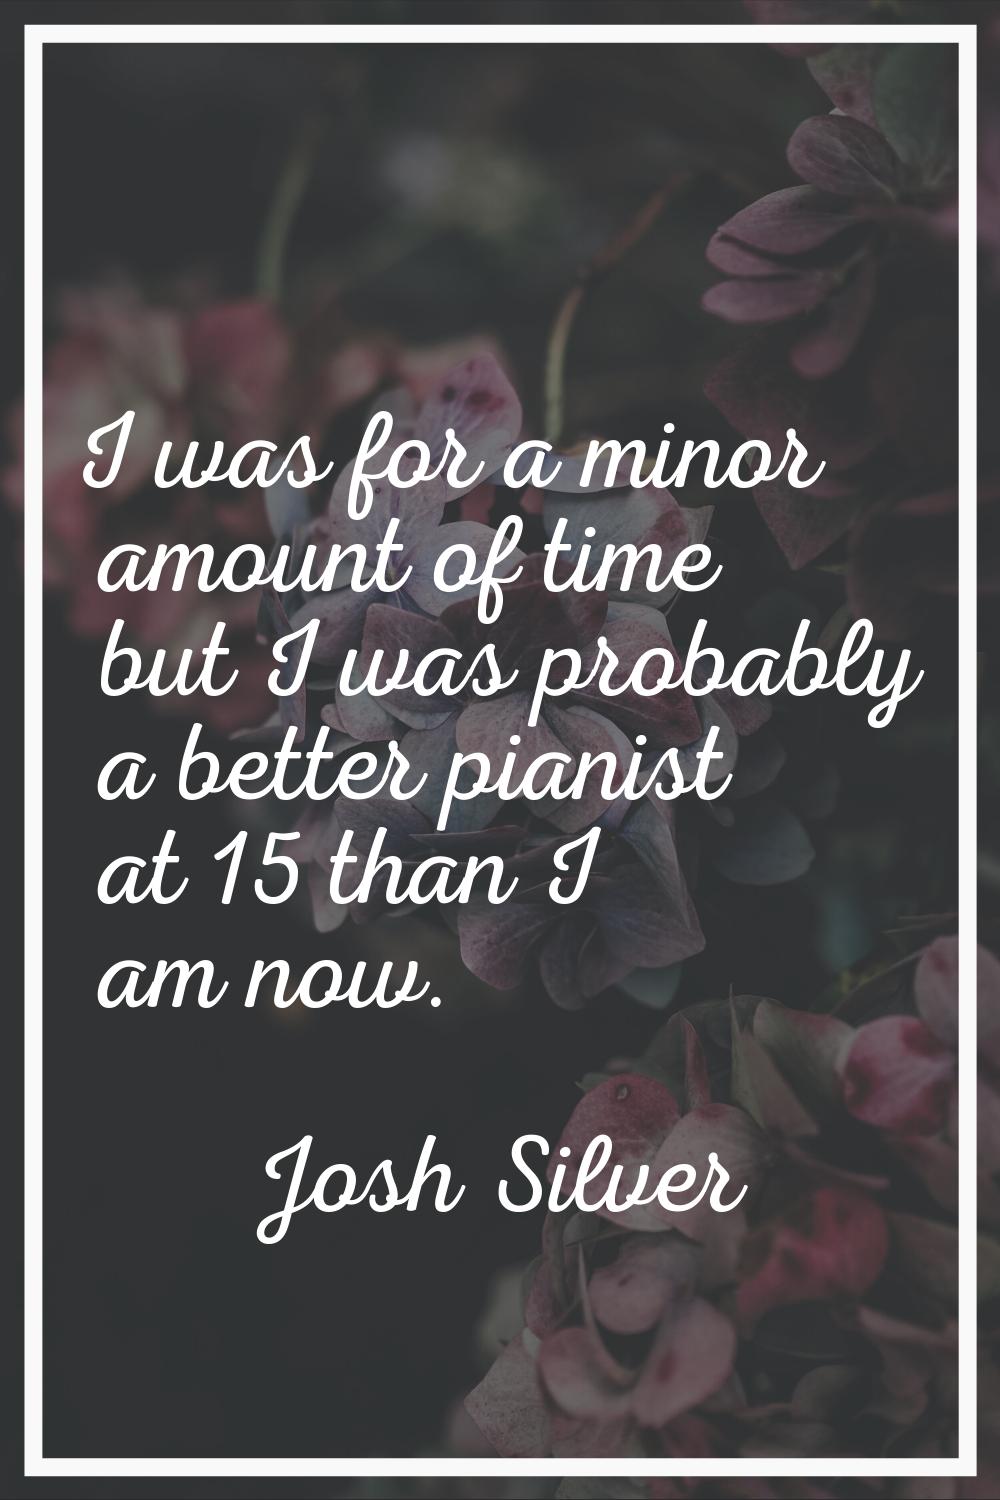 I was for a minor amount of time but I was probably a better pianist at 15 than I am now.